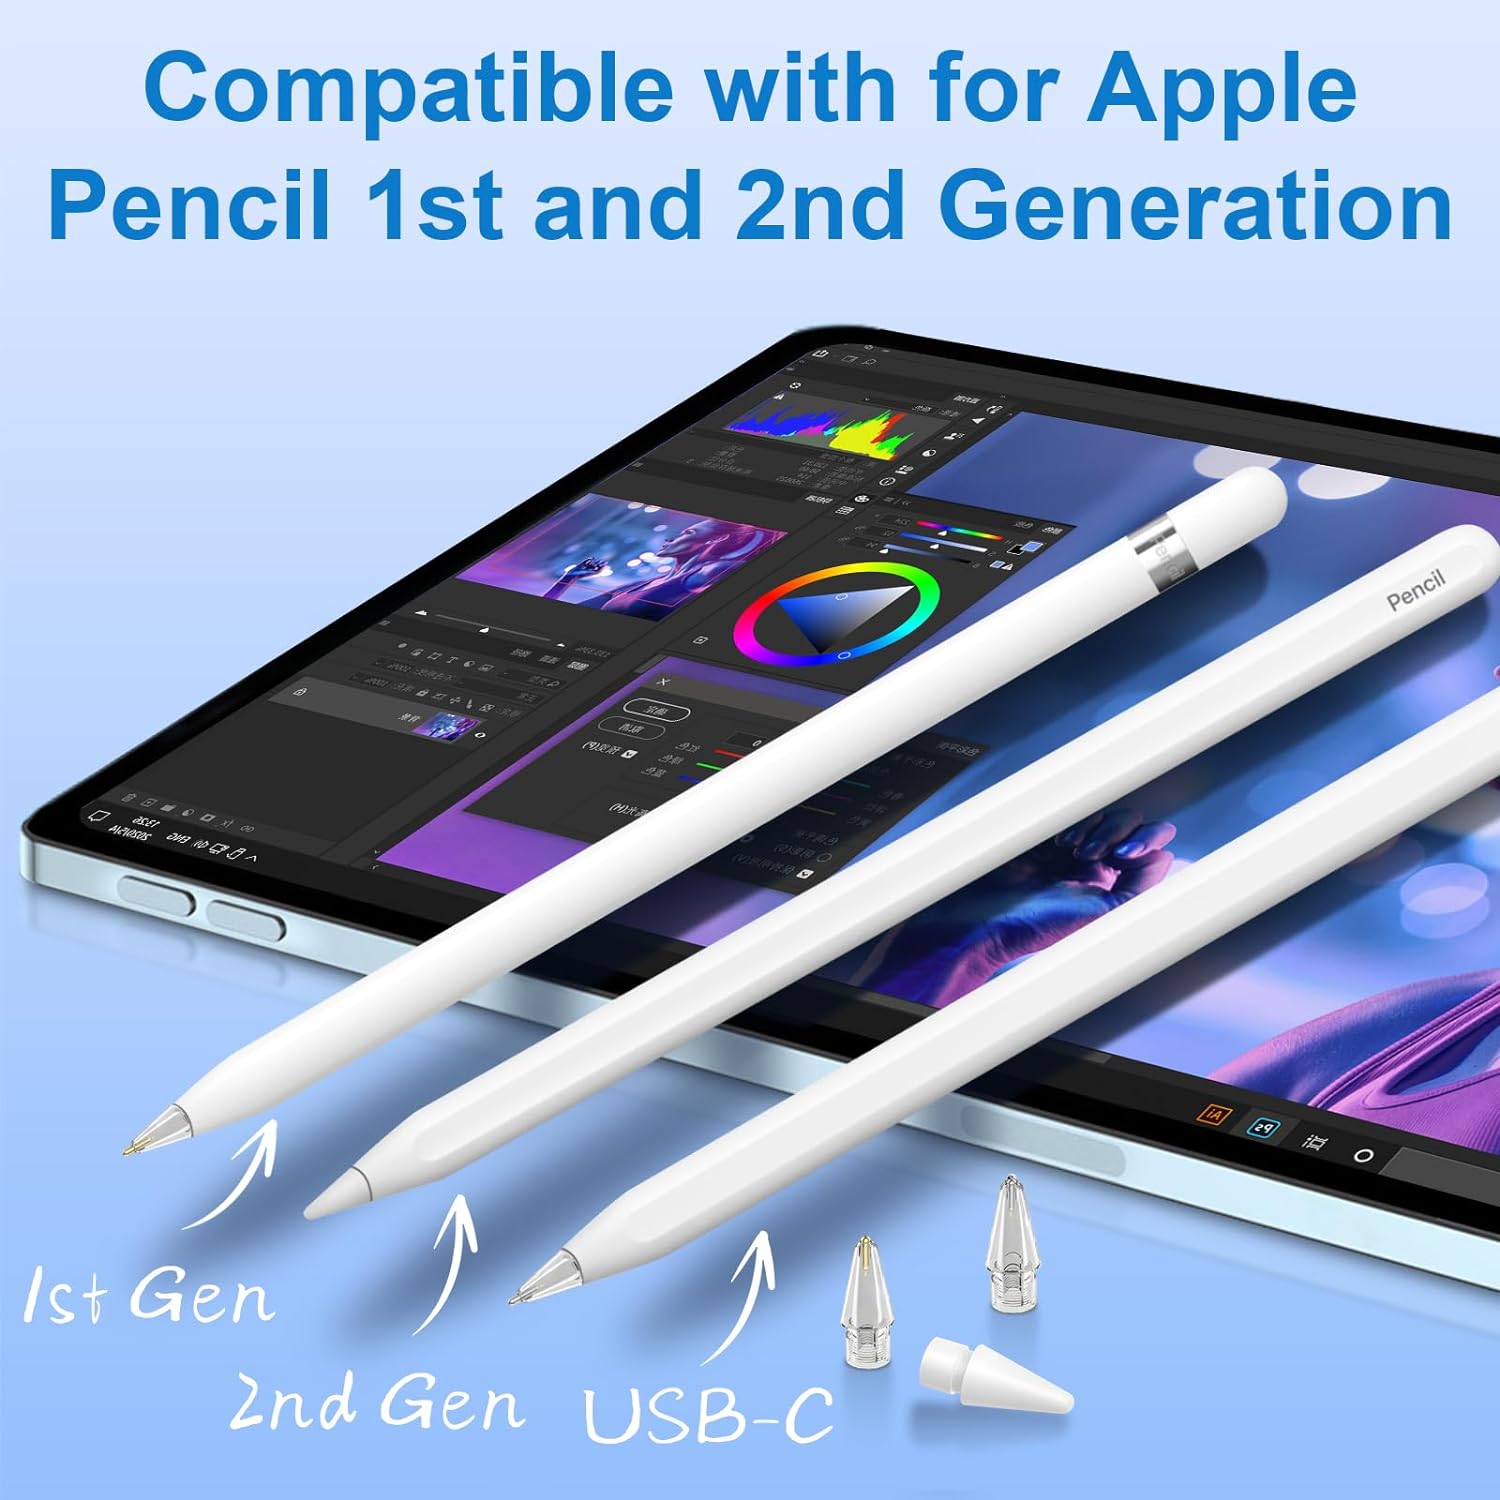 6 PCS Replacement Apple Pencil Tips for Apple Pencil 2nd 1st Generation and USB-C,Tips for Apple Pencil(White/Clear)